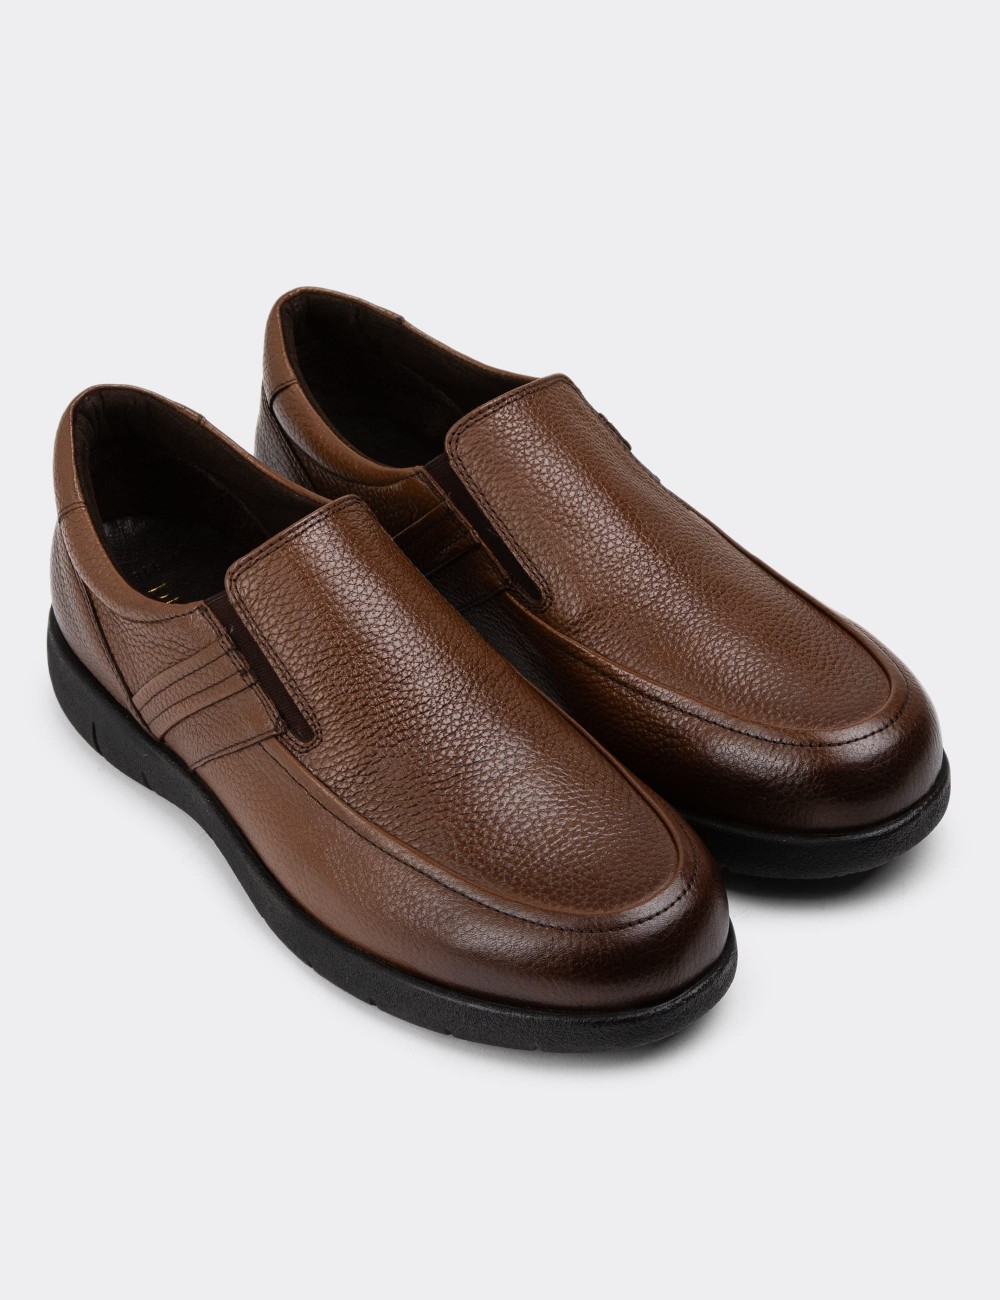 Tan Leather Loafers Shoes - 01946MTBAC01